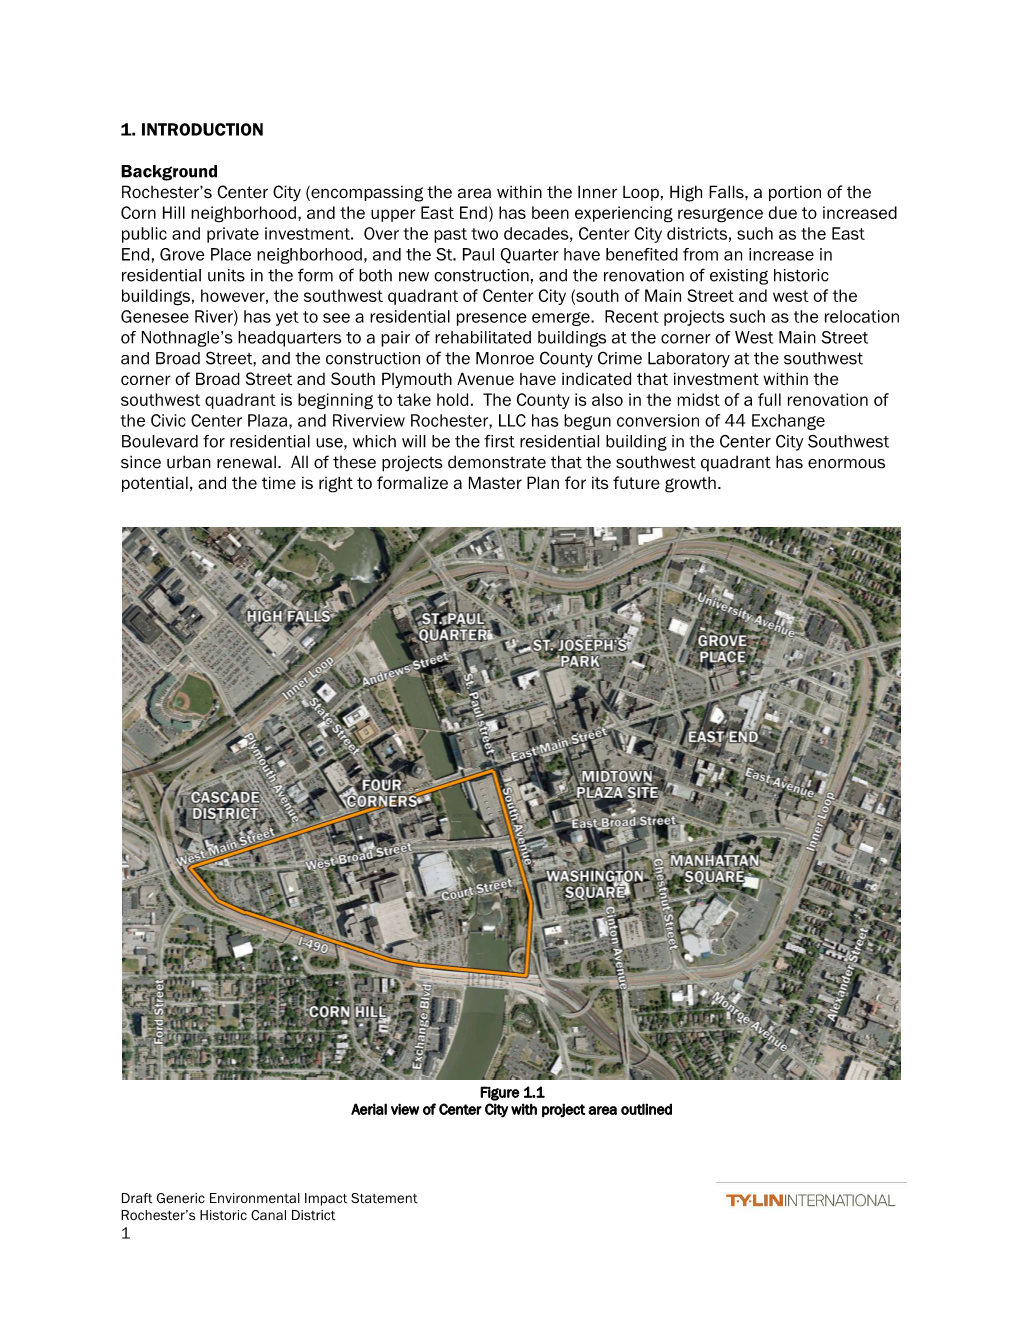 Draft Generic Environmental Impact Statement Rochester’S Historic Canal District 1